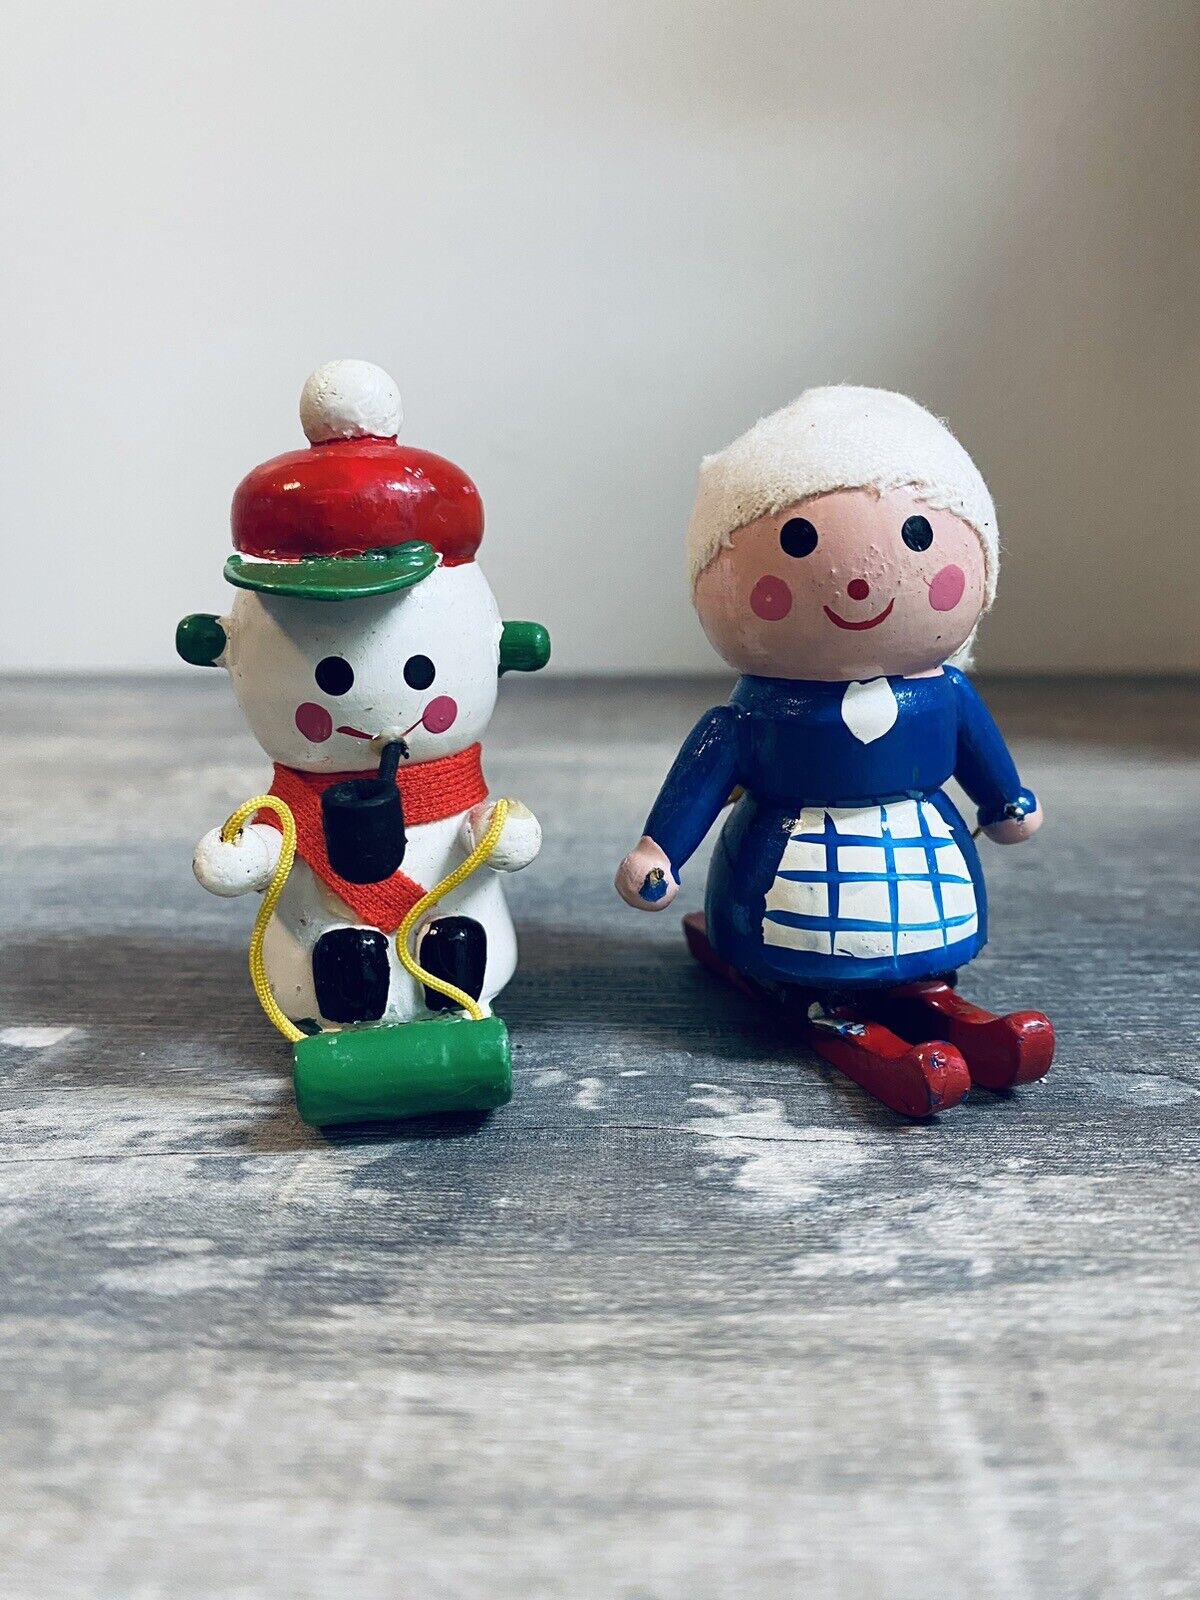 2 Vintage 1960s Wooden Christmas Figures Snowman Sled Skiing